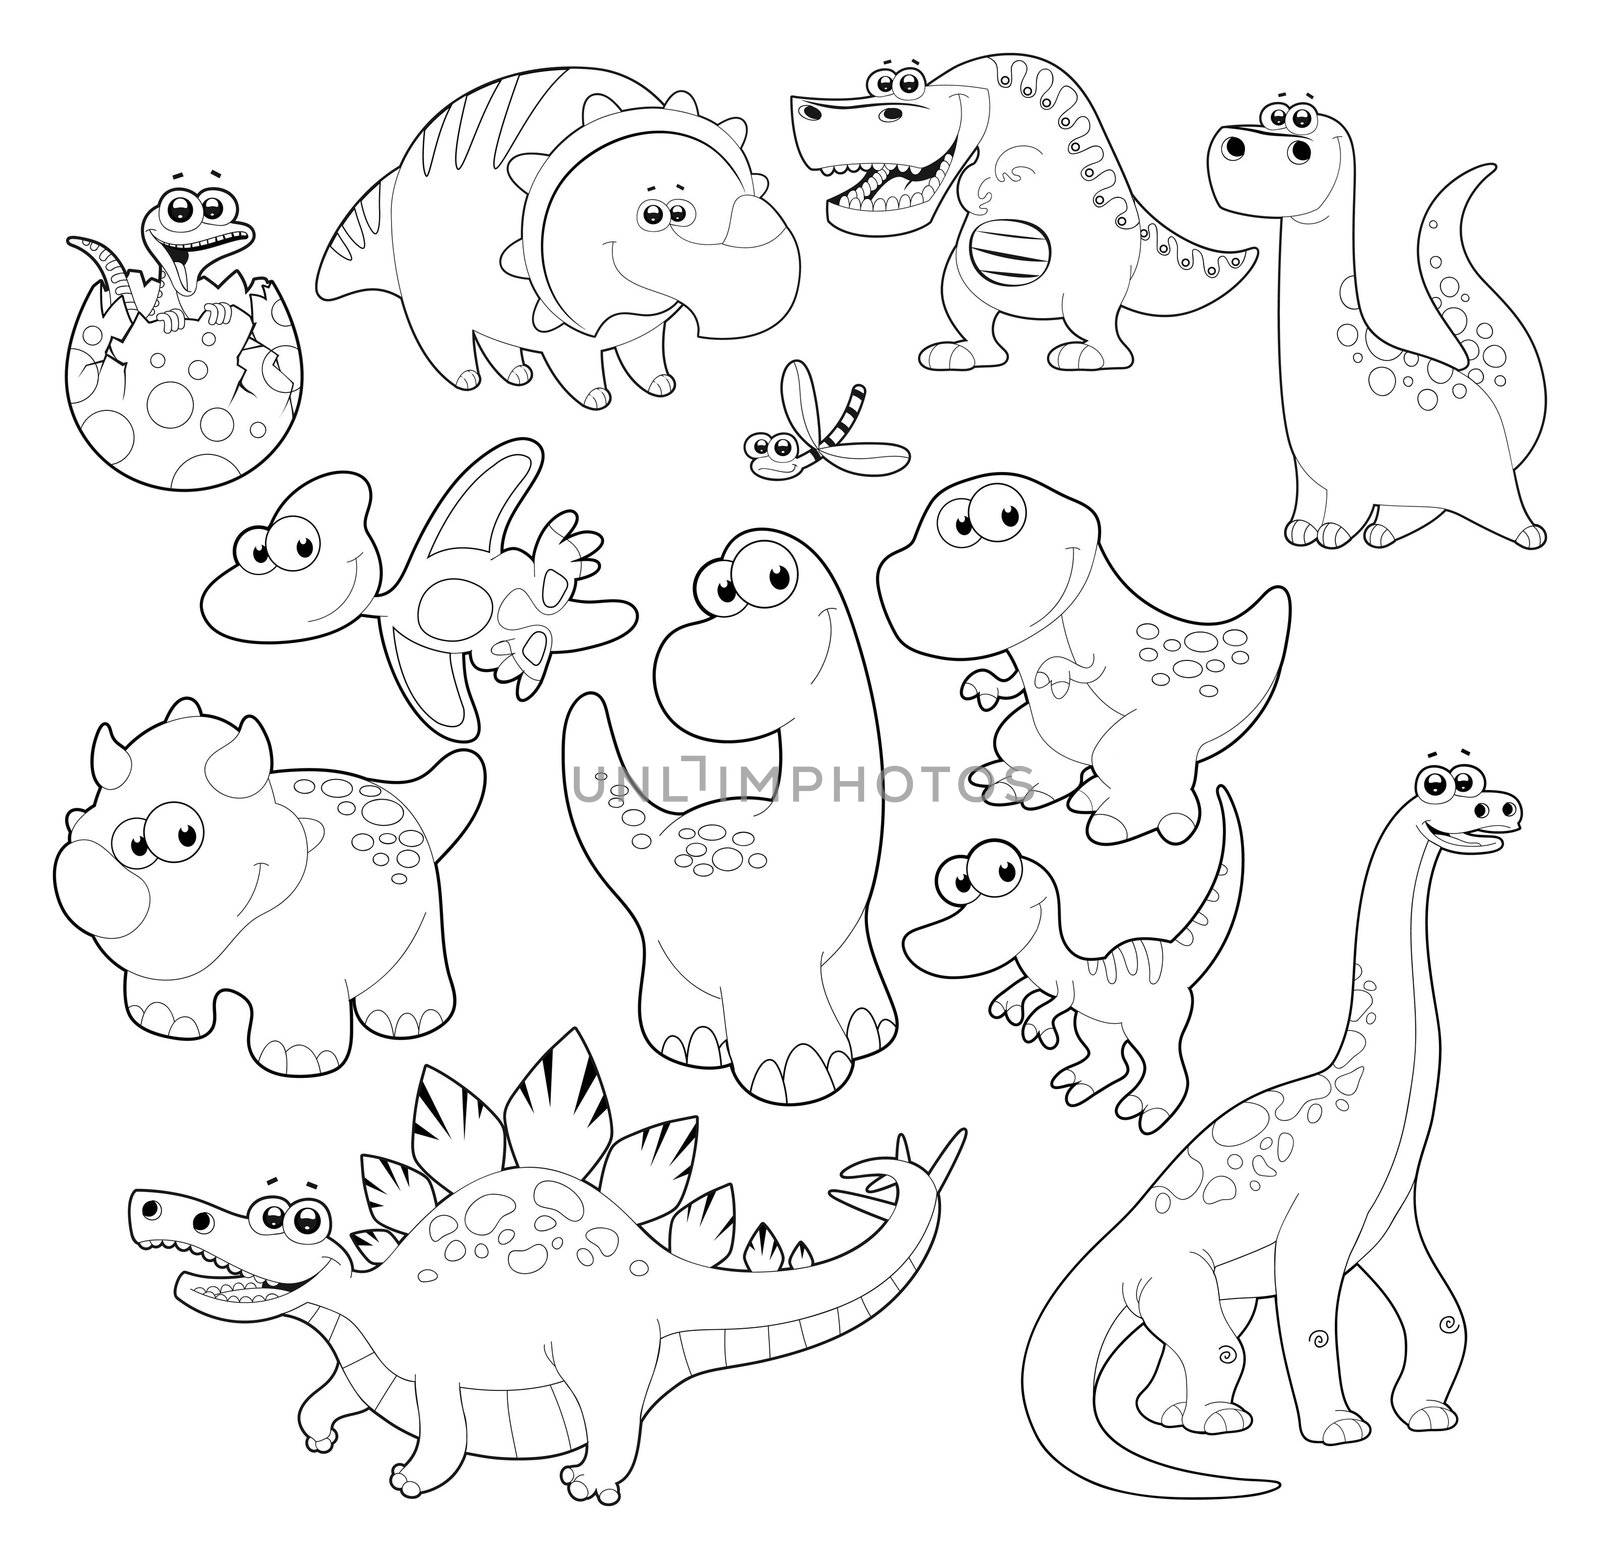 Dinosaurs Family. Vector isolated black and white characters.

